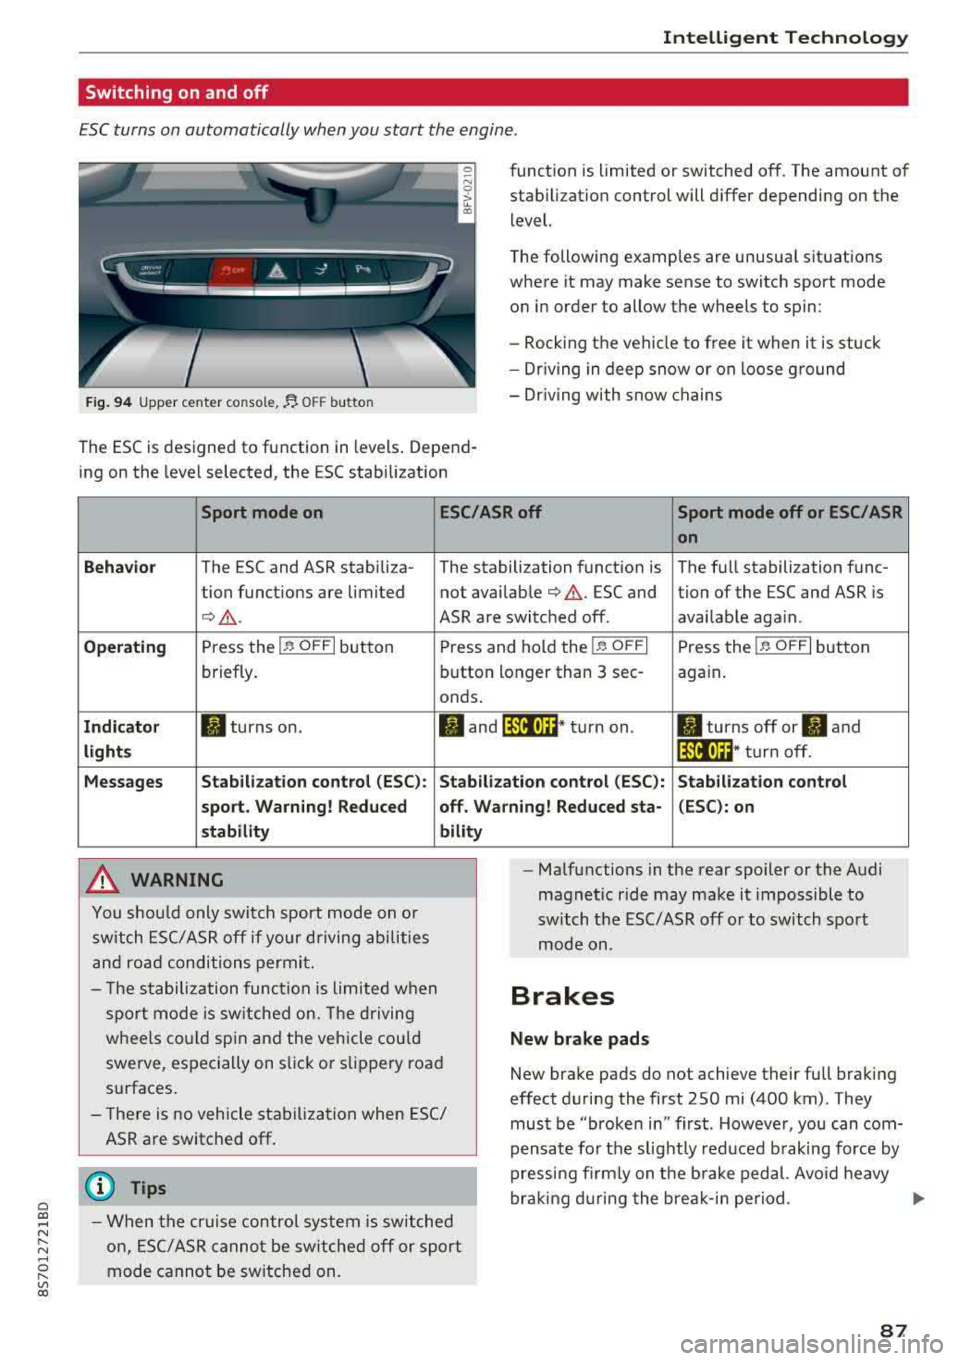 AUDI TT ROADSTER 2018  Owners Manual Cl co .... N ,.... 
N .... 0 ,.... 
Vl co 
Intelligent  Technology 
Switching  on  and  off 
ESC turns  on automatically  when you  start  the  engine. 
Fig . 9 4 Upper  center  console, fJ. OFF b utt